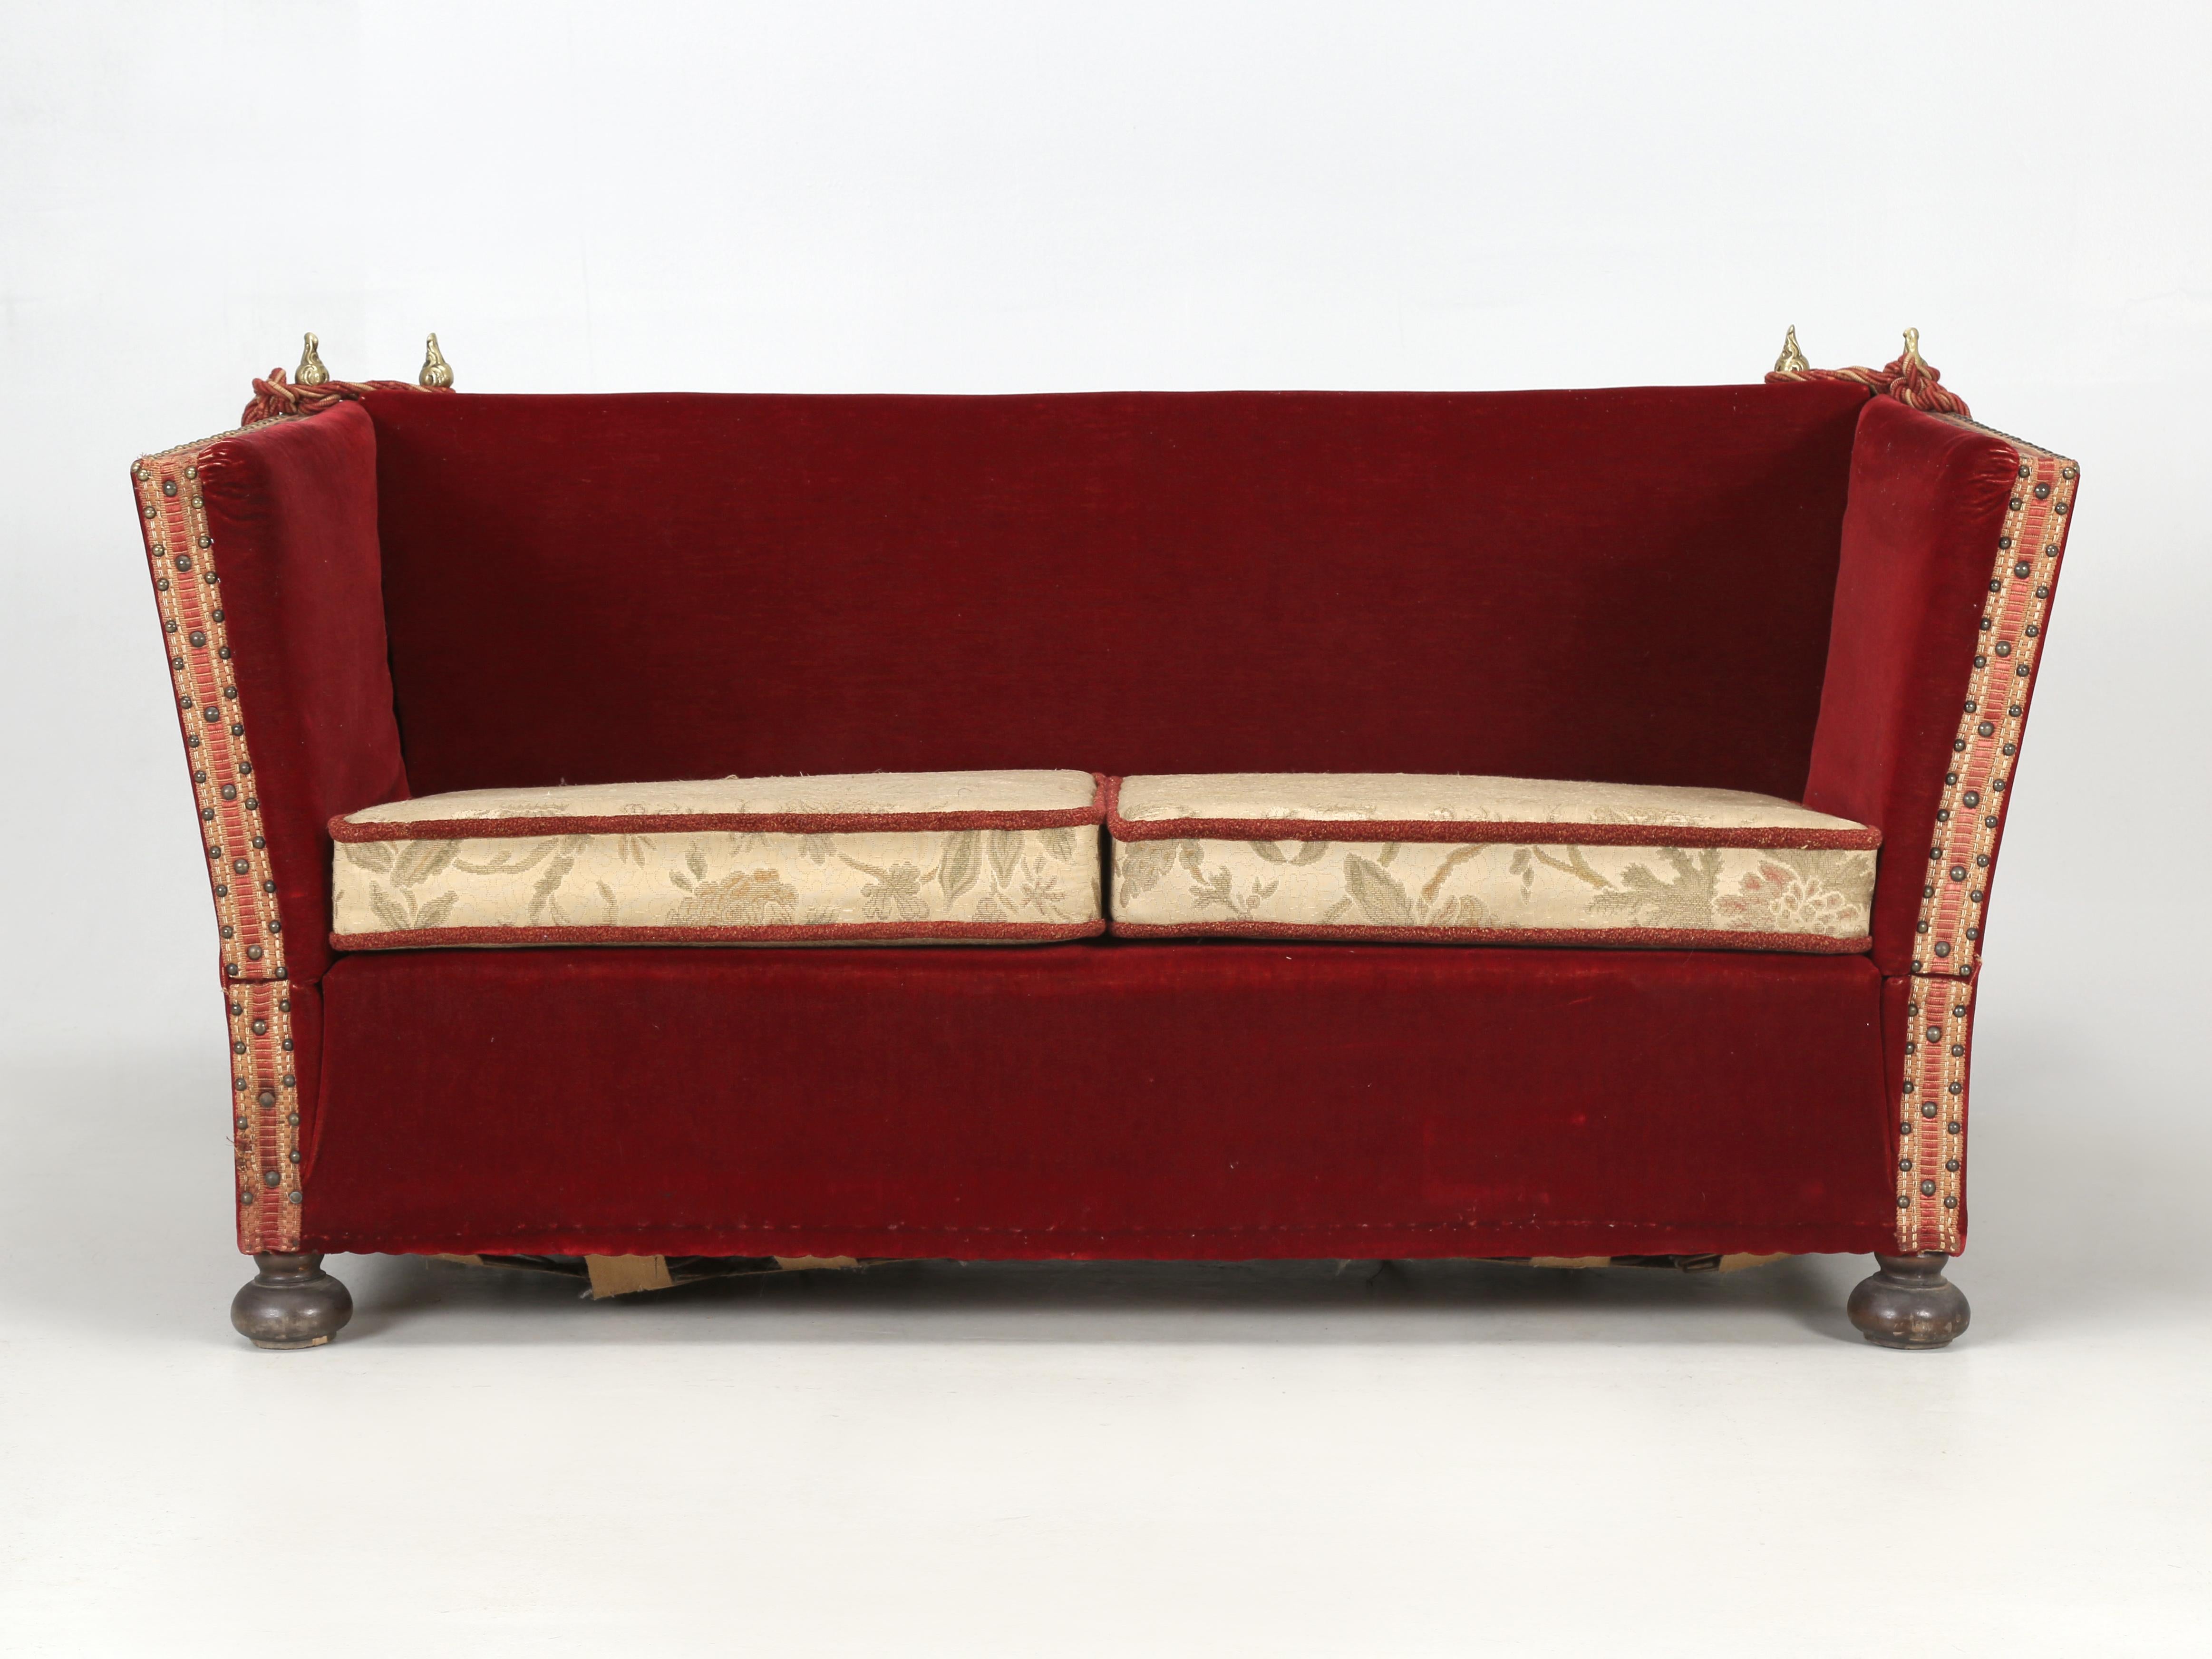 Vintage Knole settee that did not originate with from the Knoll furniture company, but rather from the Knole house in County Kent. The original Knole sofa or settee was designed around 1640 and are still being produced today. The Knole sofa